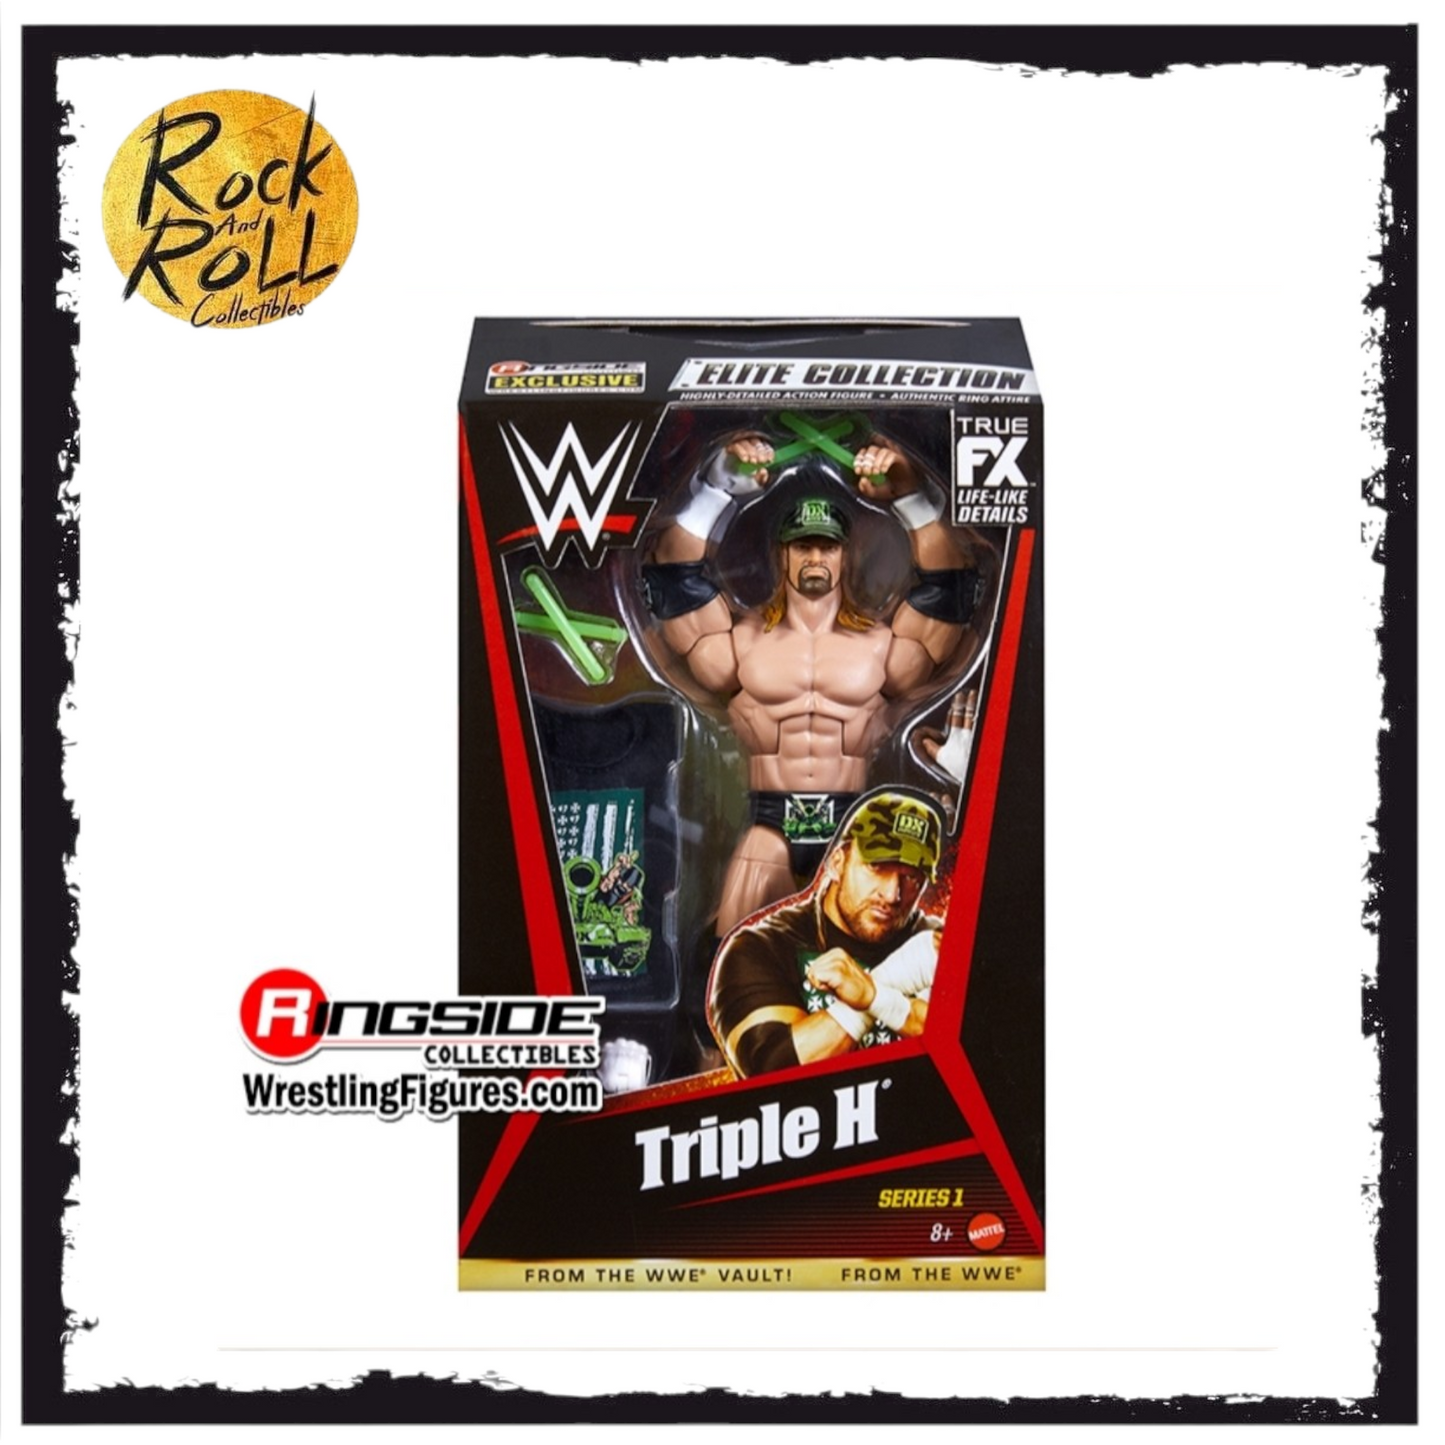 Triple H (DX) - WWE From the Vault Ringside Exclusive Series 1 - PRE ORDER